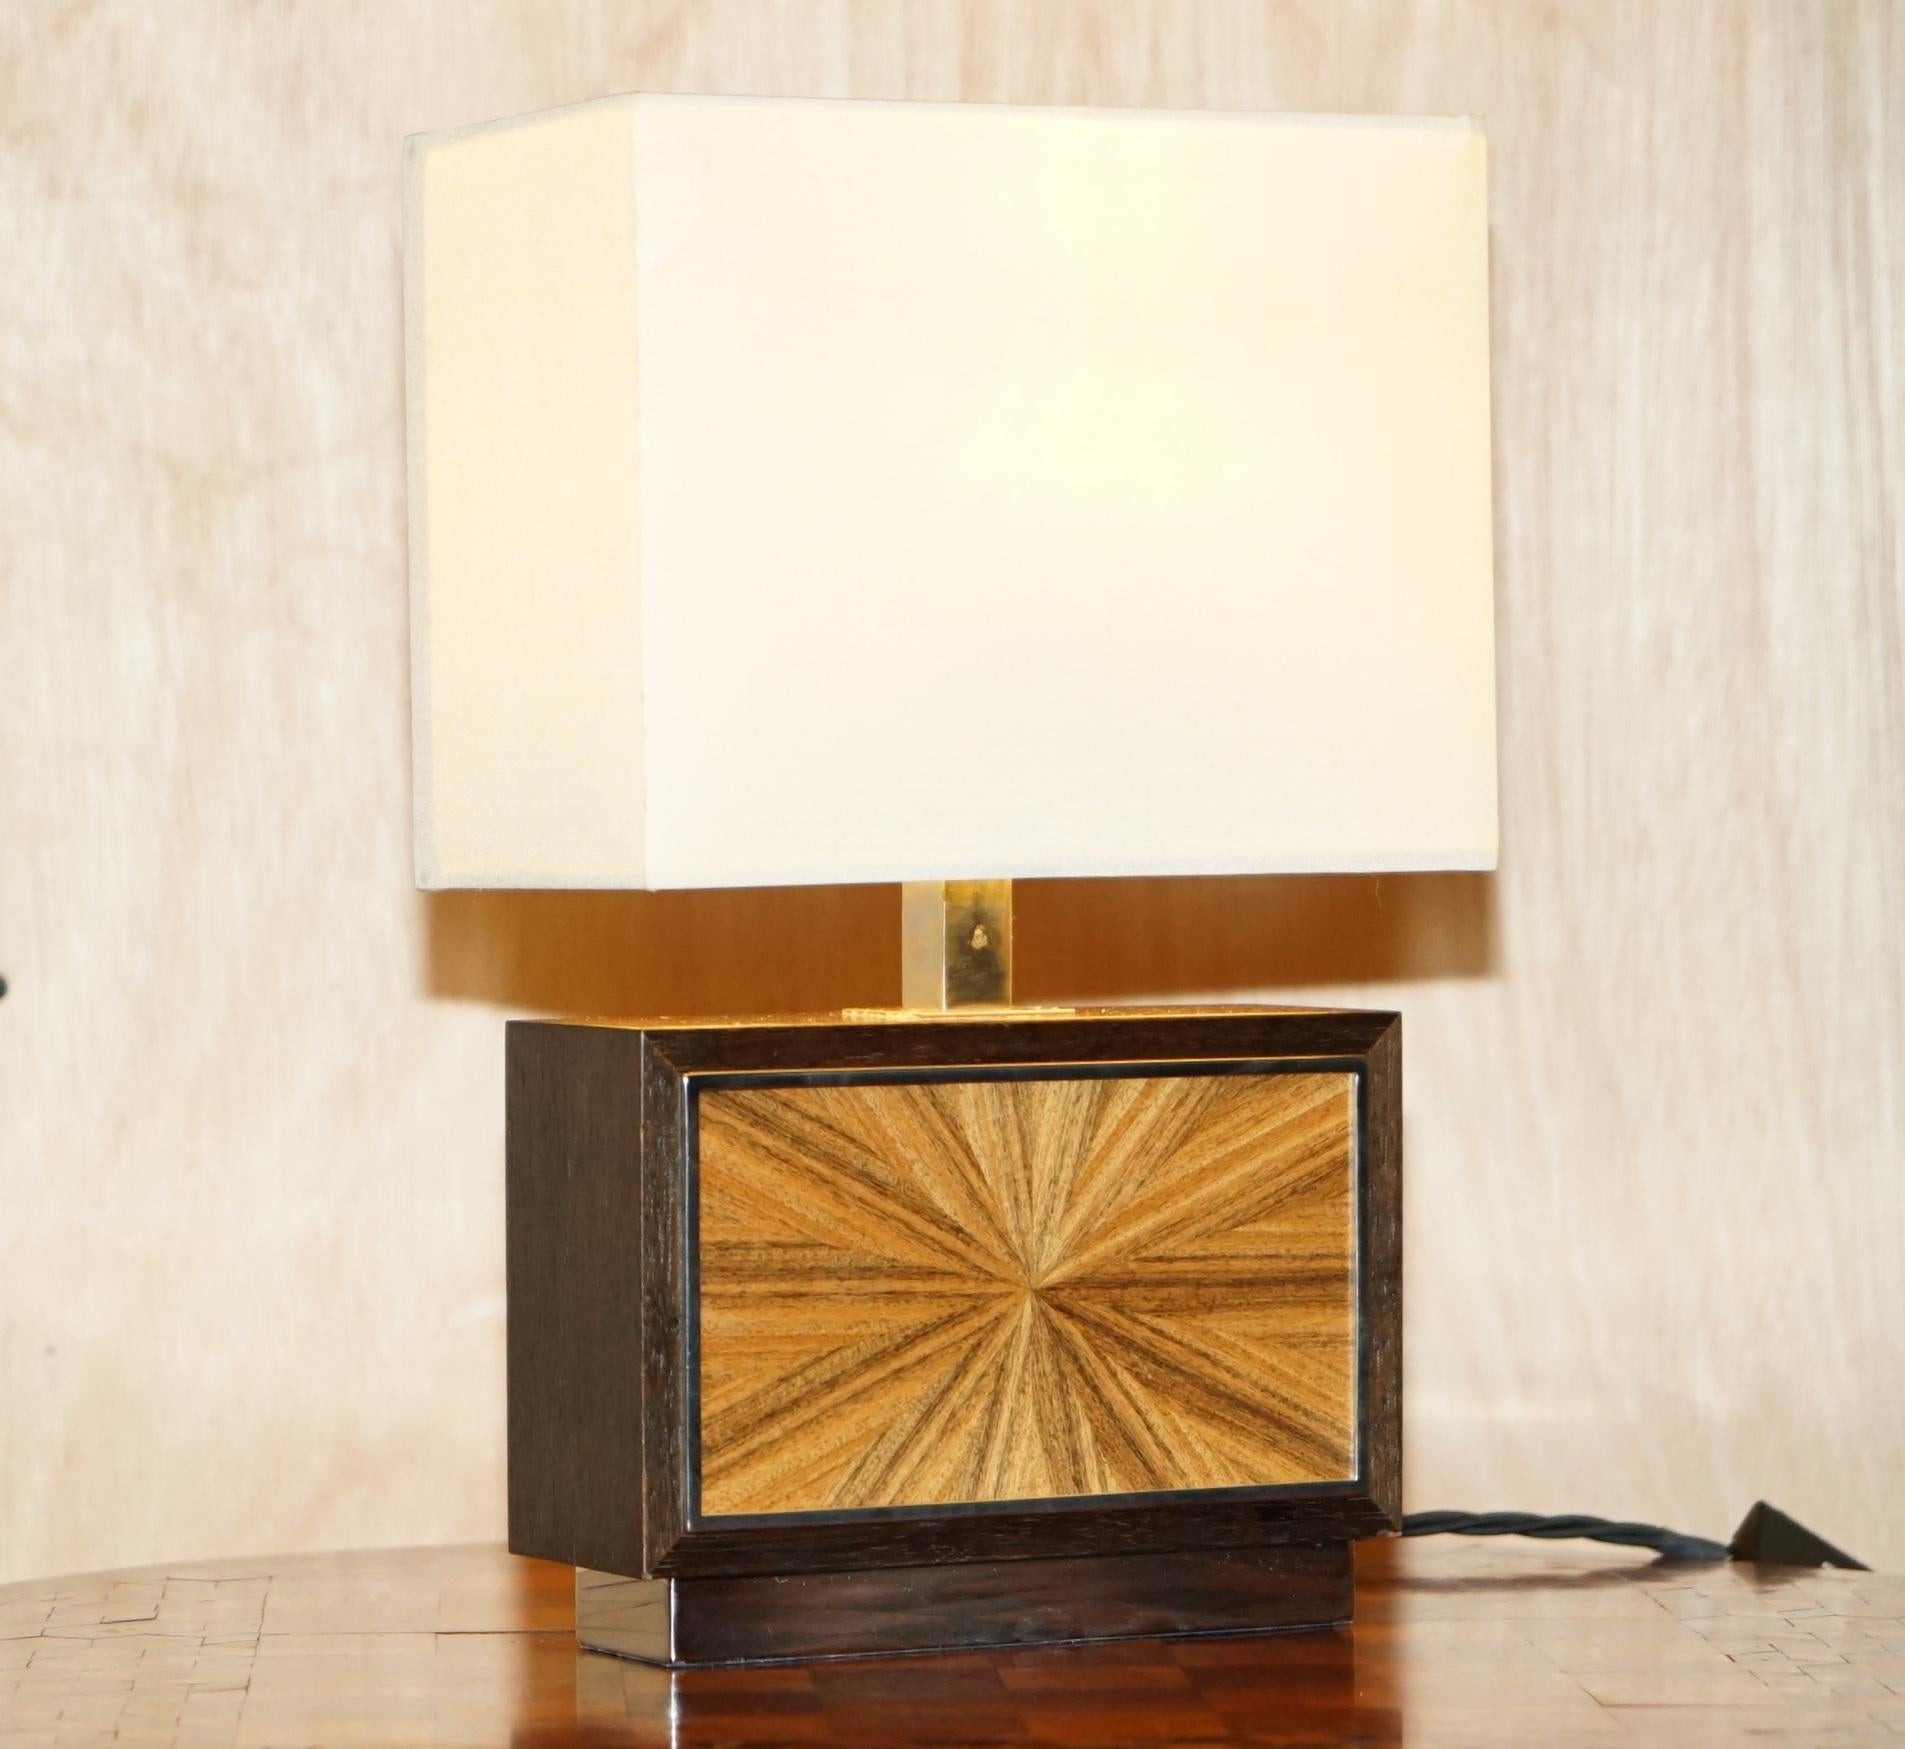 Royal House Antiques

Royal House Antiques is delighted to offer for sale this stunning pair Viscount David Linley side table lamps with the original shades

A very good looking and well made pair, the lamps come with dimmer switch controls as